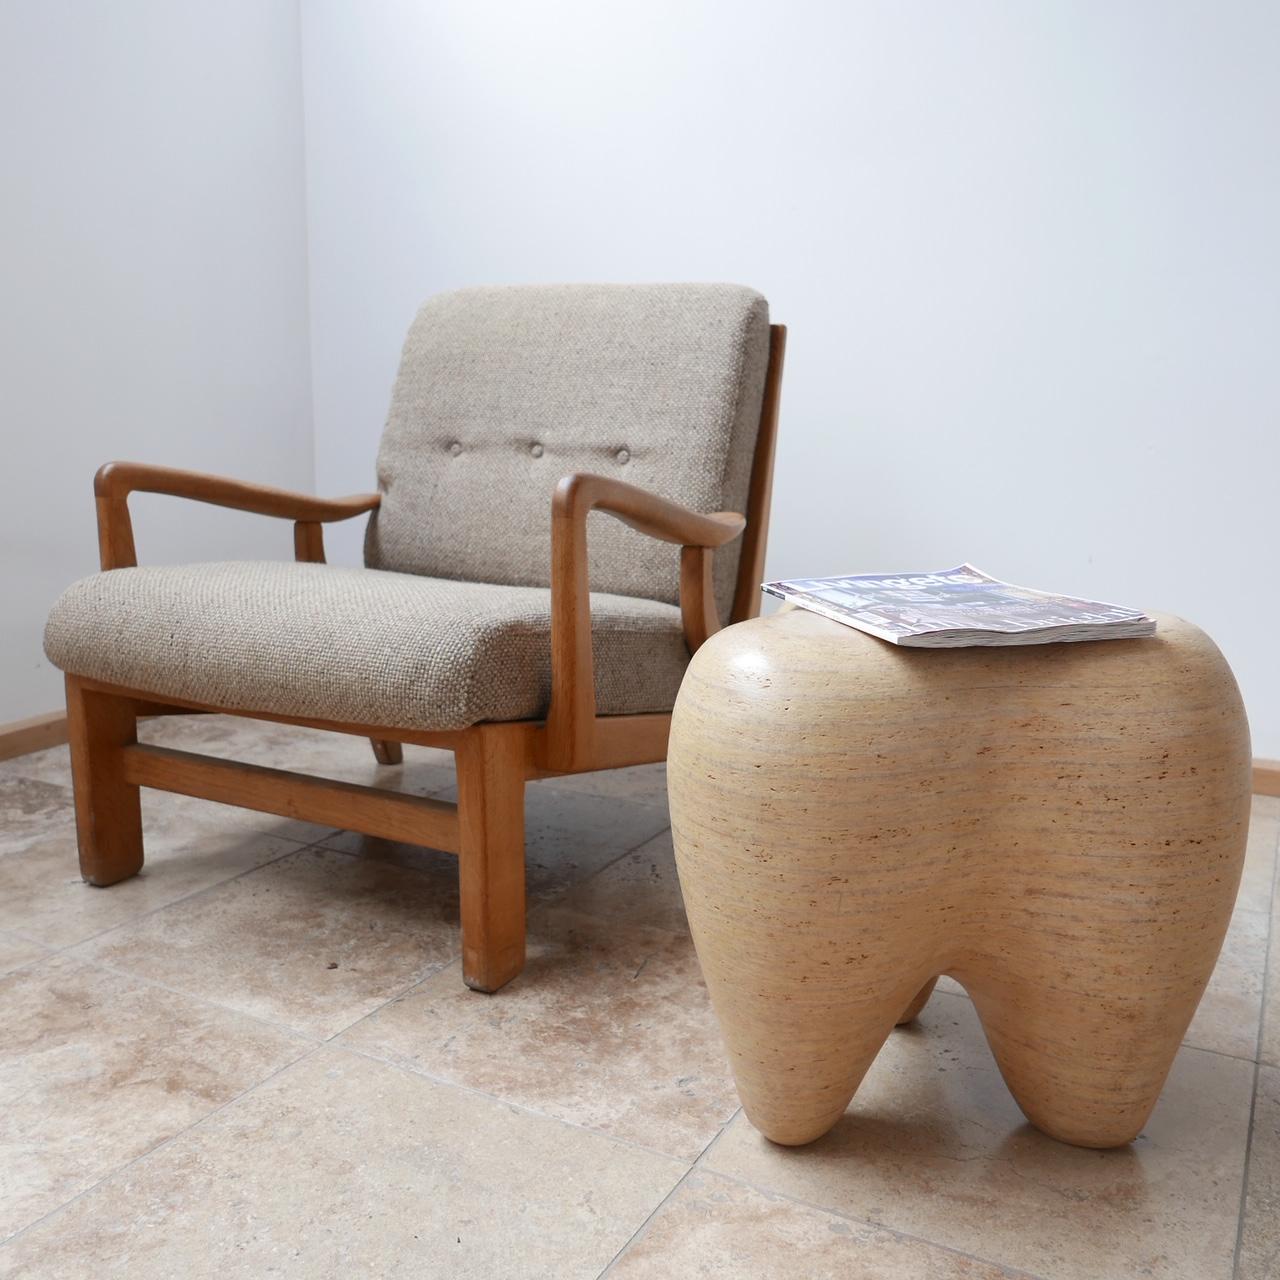 A highly unusual side table that is almost a piece of artwork in itself.

Formed from pressed wood or the like, it is raised on three 'legs'.

Ideal as a side table or to host a sculpture, it is the perfect finishing aspect for an interior